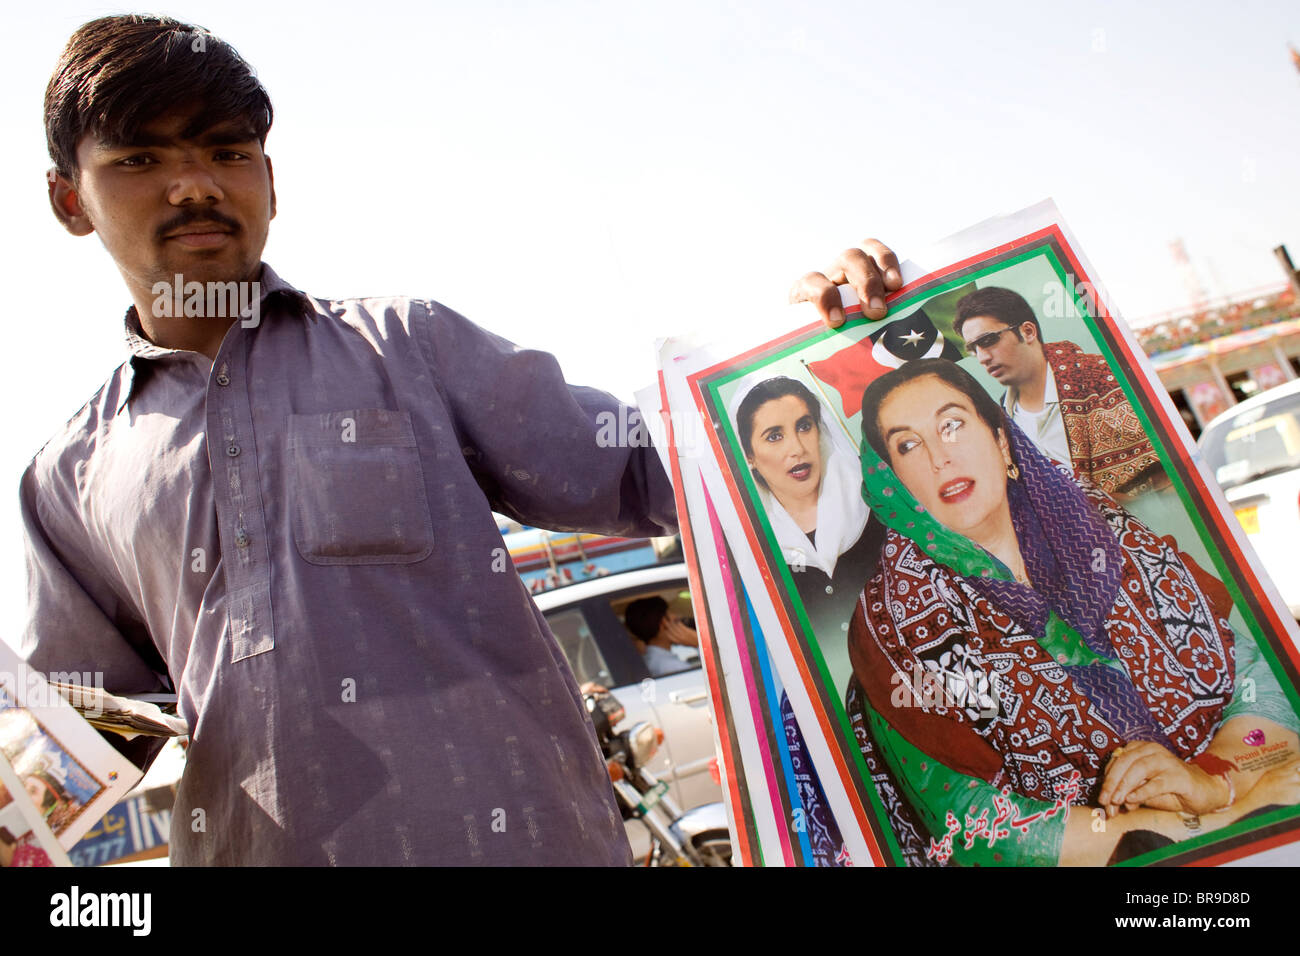 A young man sells posters in Karachi Pakistan. Stock Photo